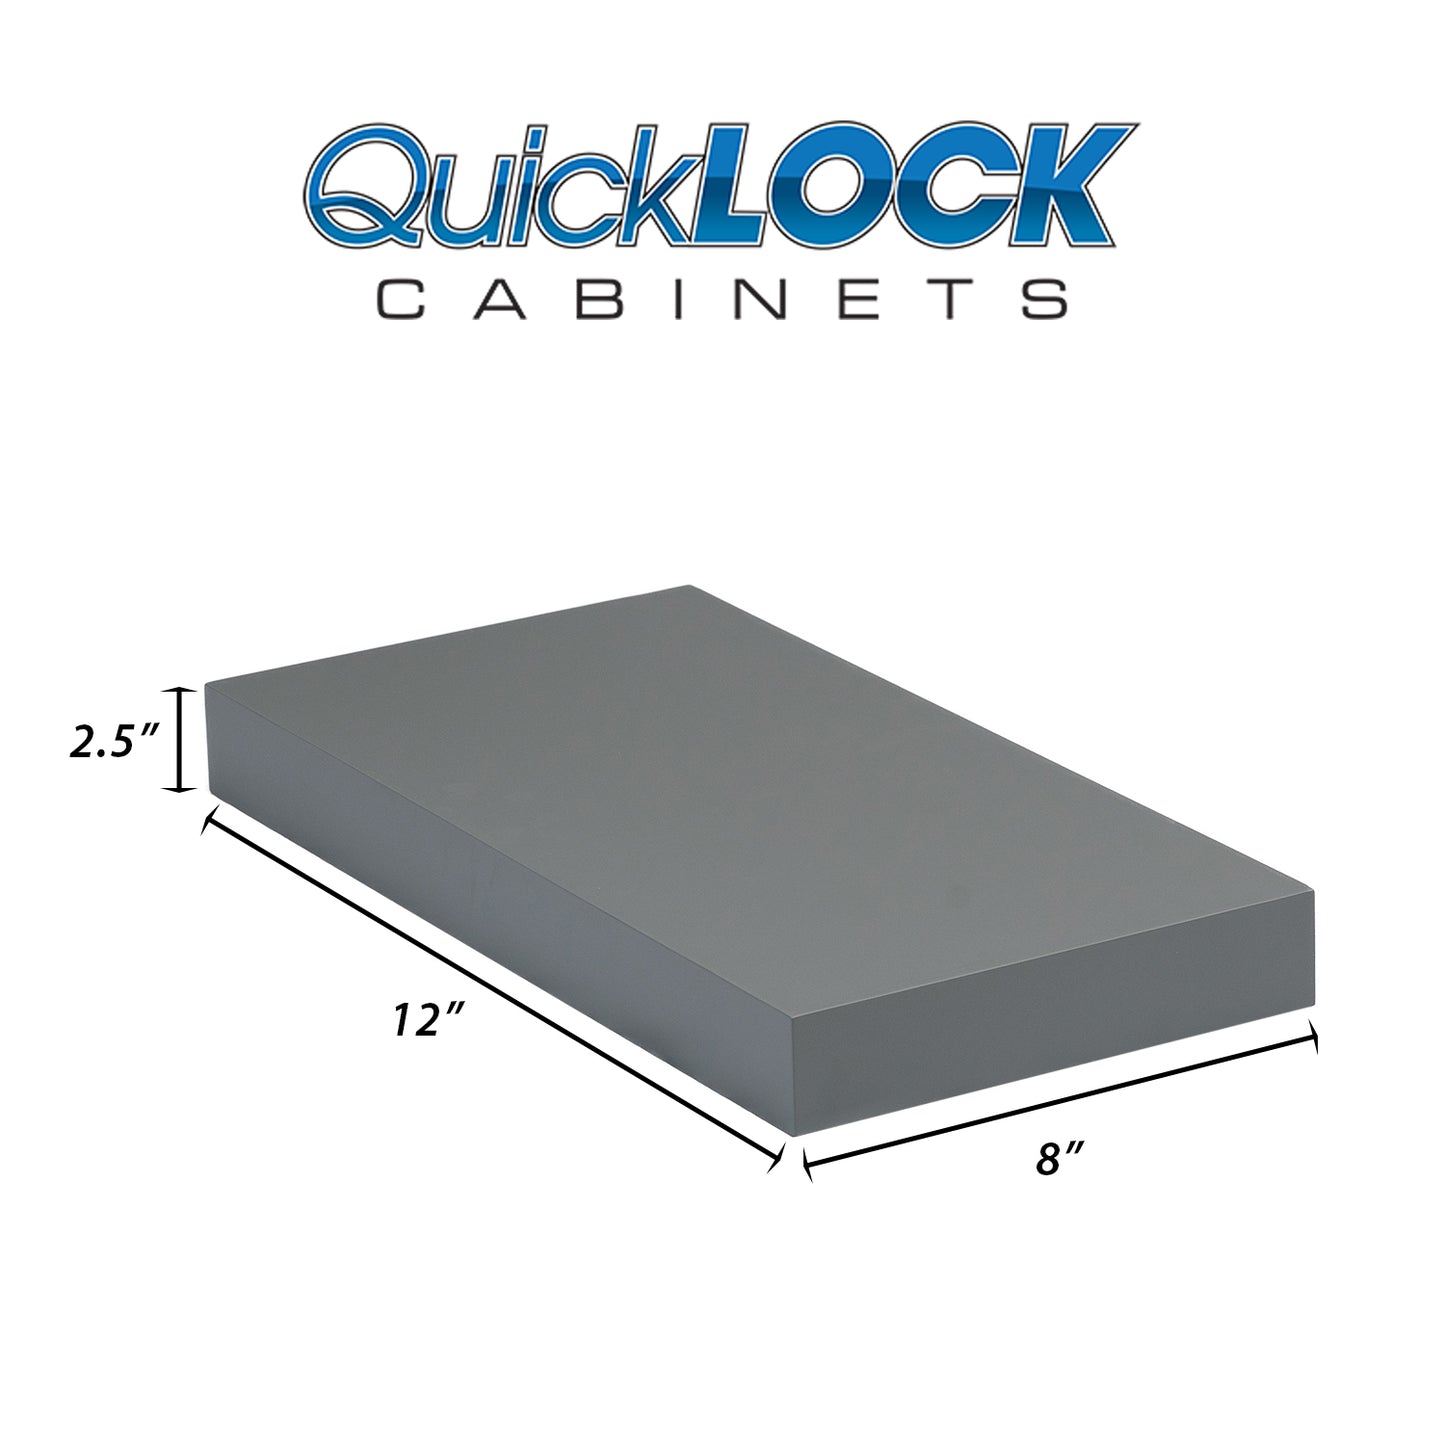 Quicklock Cabinets Floating Shelves | 2.5" Thick | Magnetic Grey, 8" D x 12" W x 2.5" H | American Made | Hardwood Bracket | Complete Shelf Unit